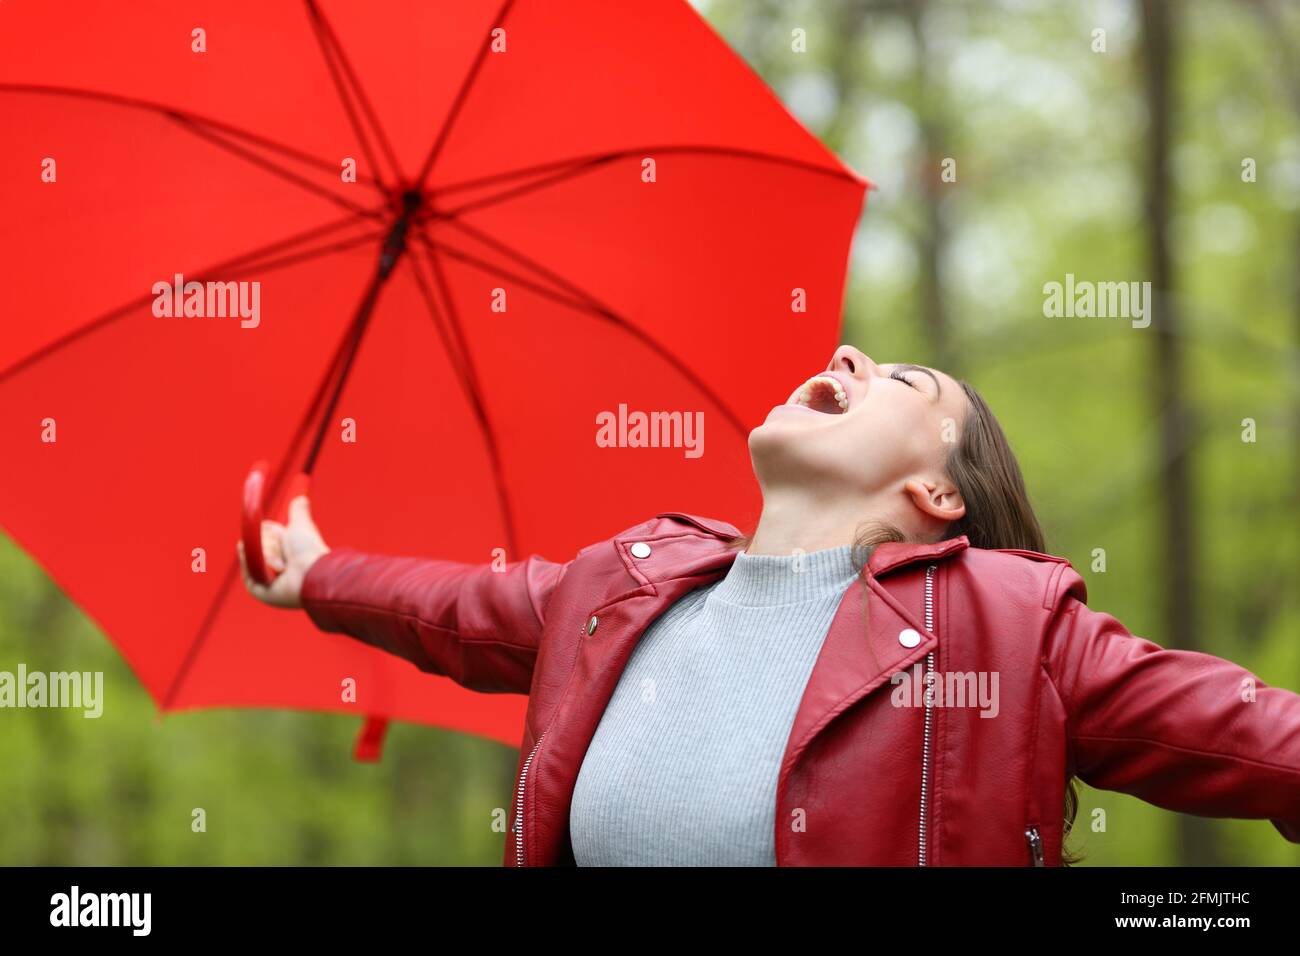 Excited woman in red celebrating happiness under the rain holding umbrella in a forest Stock Photo